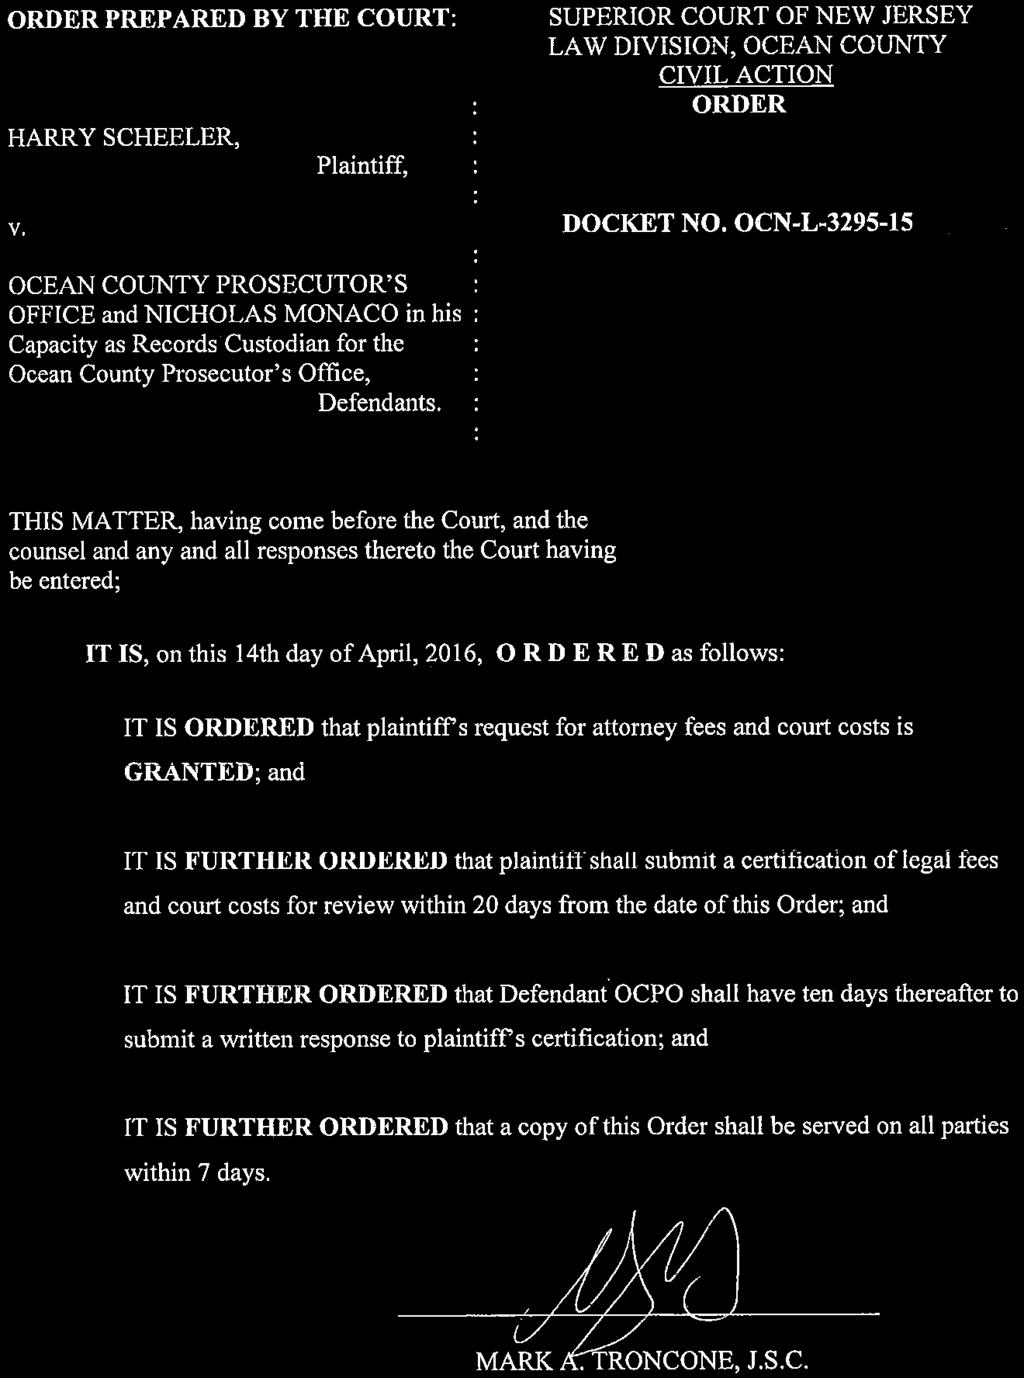 ORDER PREPARED BY THE COURT: HARRY SCHEELER, Plaintiff, SUPERIOR COURT OF NEW JERSEY LAW DIVISION, OCEAN COUNTY CIVIL ACTION ORDER v. DOCKET NO.